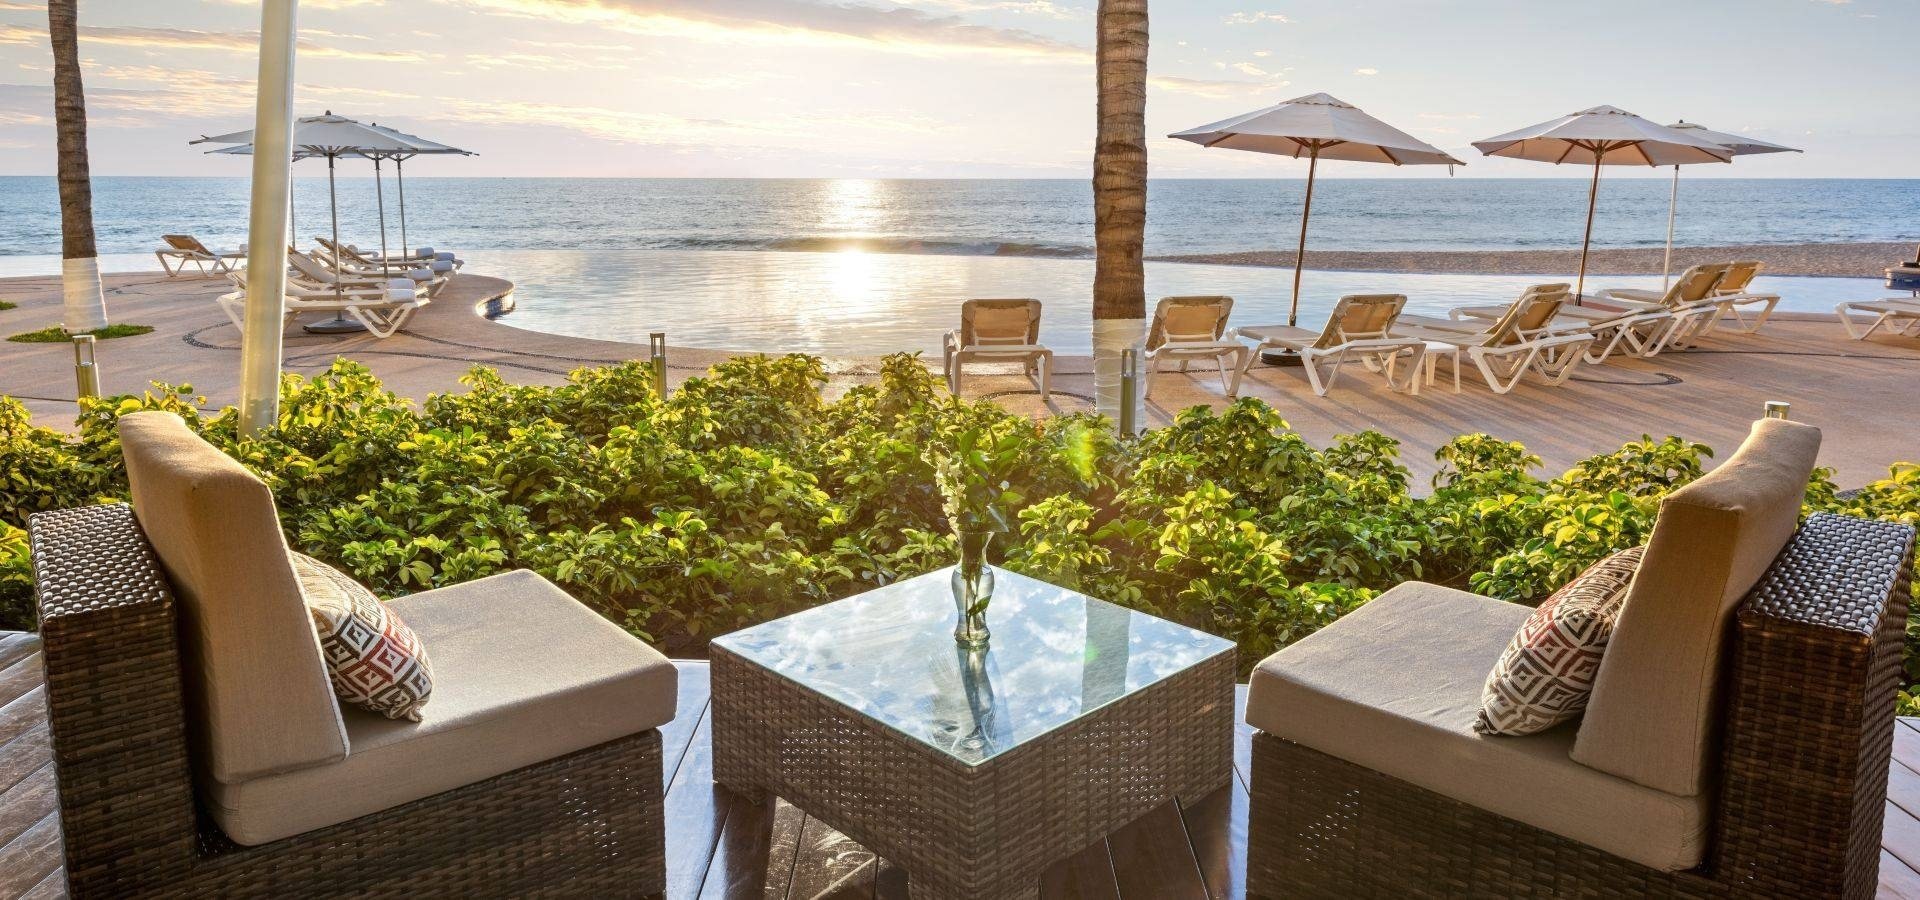 Area to sit and enjoy the view of the infinity pool over the sea at Park Royal Beach Mazatlán